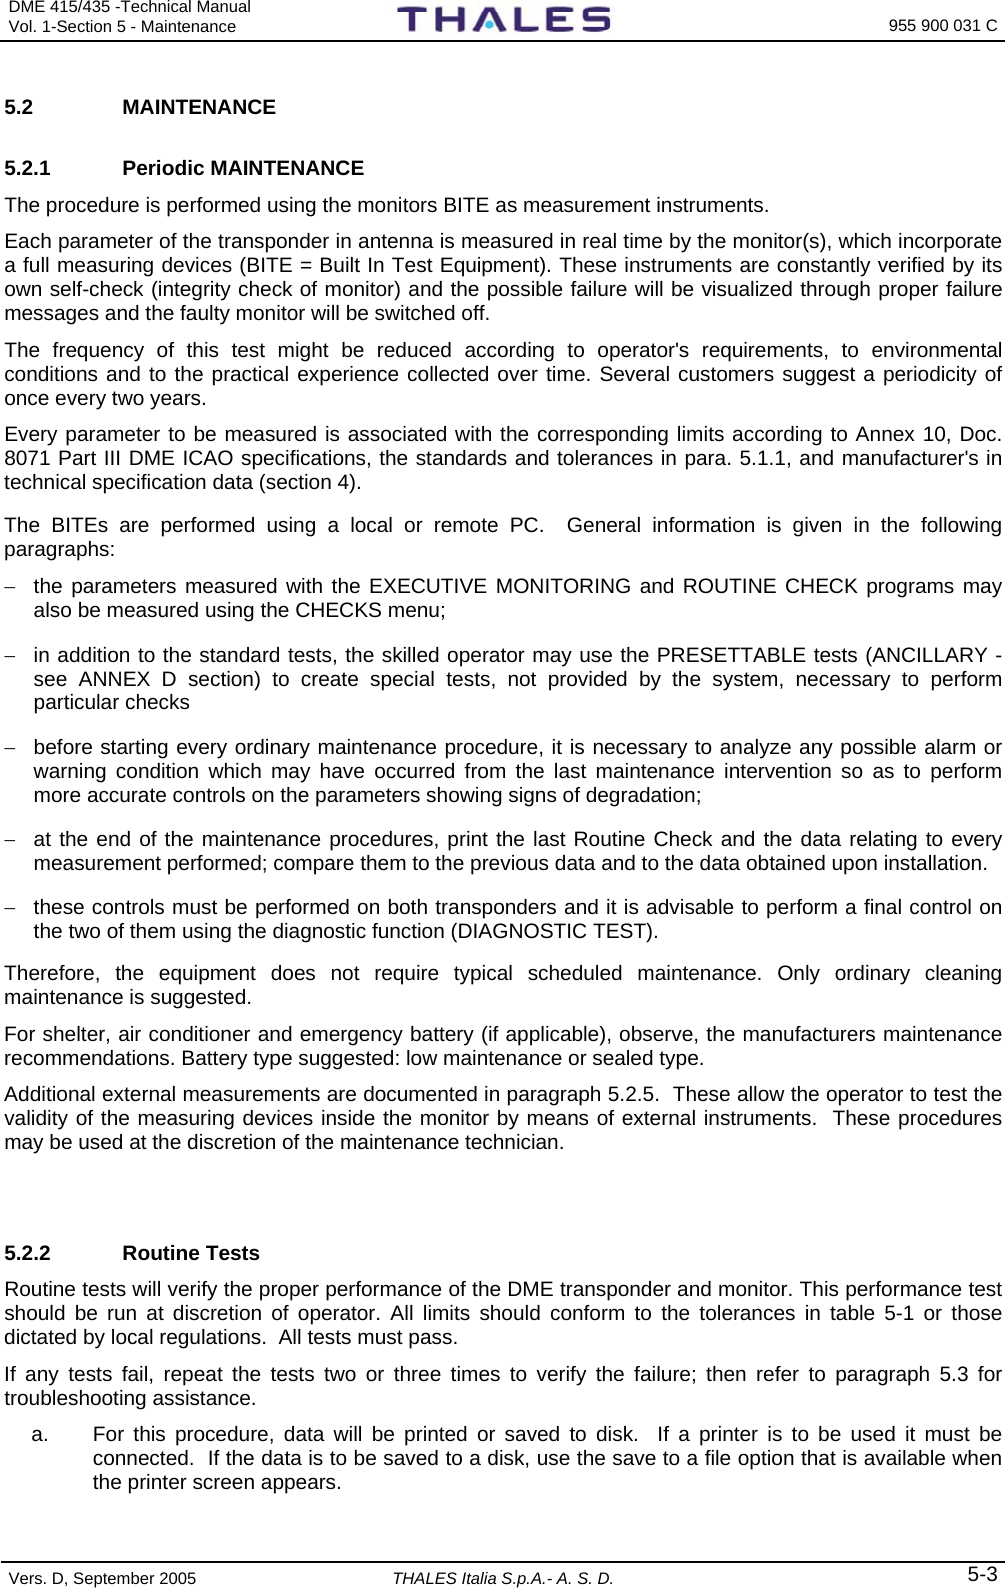 DME 415/435 -Technical Manual Vol. 1-Section 5 - Maintenance    955 900 031 C Vers. D, September 2005  THALES Italia S.p.A.- A. S. D. 5-3 5.2 MAINTENANCE 5.2.1 Periodic MAINTENANCE The procedure is performed using the monitors BITE as measurement instruments. Each parameter of the transponder in antenna is measured in real time by the monitor(s), which incorporate a full measuring devices (BITE = Built In Test Equipment). These instruments are constantly verified by its own self-check (integrity check of monitor) and the possible failure will be visualized through proper failure messages and the faulty monitor will be switched off.  The frequency of this test might be reduced according to operator&apos;s requirements, to environmental conditions and to the practical experience collected over time. Several customers suggest a periodicity of once every two years.  Every parameter to be measured is associated with the corresponding limits according to Annex 10, Doc. 8071 Part III DME ICAO specifications, the standards and tolerances in para. 5.1.1, and manufacturer&apos;s in technical specification data (section 4). The BITEs are performed using a local or remote PC.  General information is given in the following paragraphs: −  the parameters measured with the EXECUTIVE MONITORING and ROUTINE CHECK programs may also be measured using the CHECKS menu; −  in addition to the standard tests, the skilled operator may use the PRESETTABLE tests (ANCILLARY - see ANNEX D section) to create special tests, not provided by the system, necessary to perform particular checks  −  before starting every ordinary maintenance procedure, it is necessary to analyze any possible alarm or warning condition which may have occurred from the last maintenance intervention so as to perform more accurate controls on the parameters showing signs of degradation; −  at the end of the maintenance procedures, print the last Routine Check and the data relating to every measurement performed; compare them to the previous data and to the data obtained upon installation.  −  these controls must be performed on both transponders and it is advisable to perform a final control on the two of them using the diagnostic function (DIAGNOSTIC TEST). Therefore, the equipment does not require typical scheduled maintenance. Only ordinary cleaning maintenance is suggested. For shelter, air conditioner and emergency battery (if applicable), observe, the manufacturers maintenance recommendations. Battery type suggested: low maintenance or sealed type. Additional external measurements are documented in paragraph 5.2.5.  These allow the operator to test the validity of the measuring devices inside the monitor by means of external instruments.  These procedures may be used at the discretion of the maintenance technician.   5.2.2 Routine Tests Routine tests will verify the proper performance of the DME transponder and monitor. This performance test should be run at discretion of operator. All limits should conform to the tolerances in table 5-1 or those dictated by local regulations.  All tests must pass.   If any tests fail, repeat the tests two or three times to verify the failure; then refer to paragraph 5.3 for troubleshooting assistance. a.  For this procedure, data will be printed or saved to disk.  If a printer is to be used it must be connected.  If the data is to be saved to a disk, use the save to a file option that is available when the printer screen appears. 